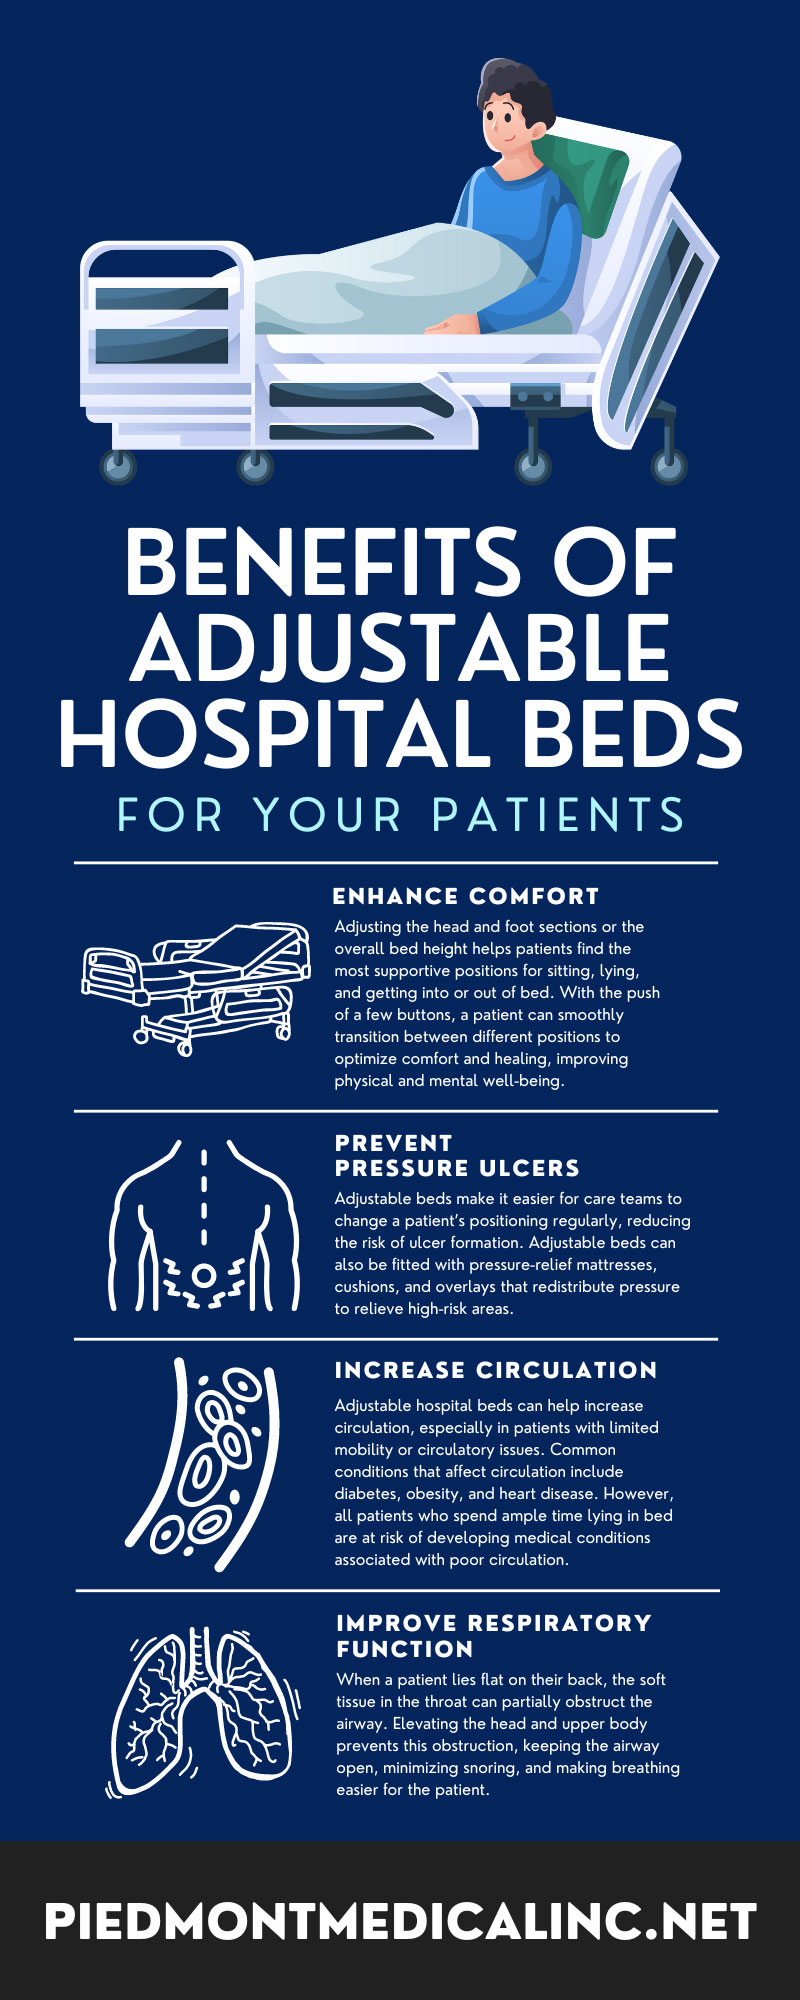 Benefits of Adjustable Hospital Beds for Your Patients
